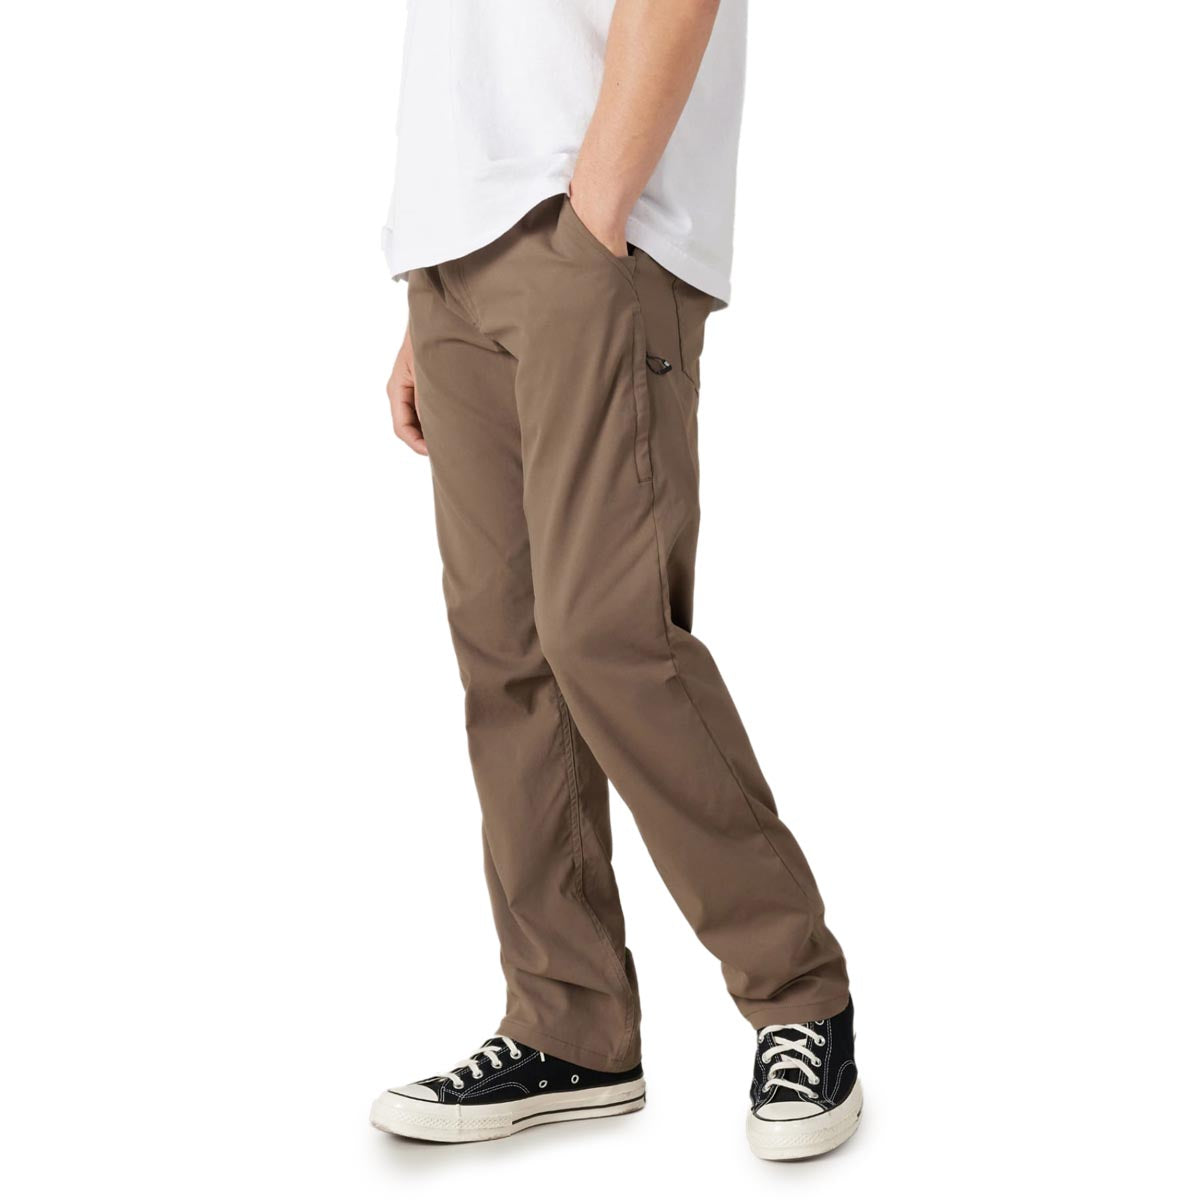 686 Everywhere Relaxed Pants - Tobacco image 3